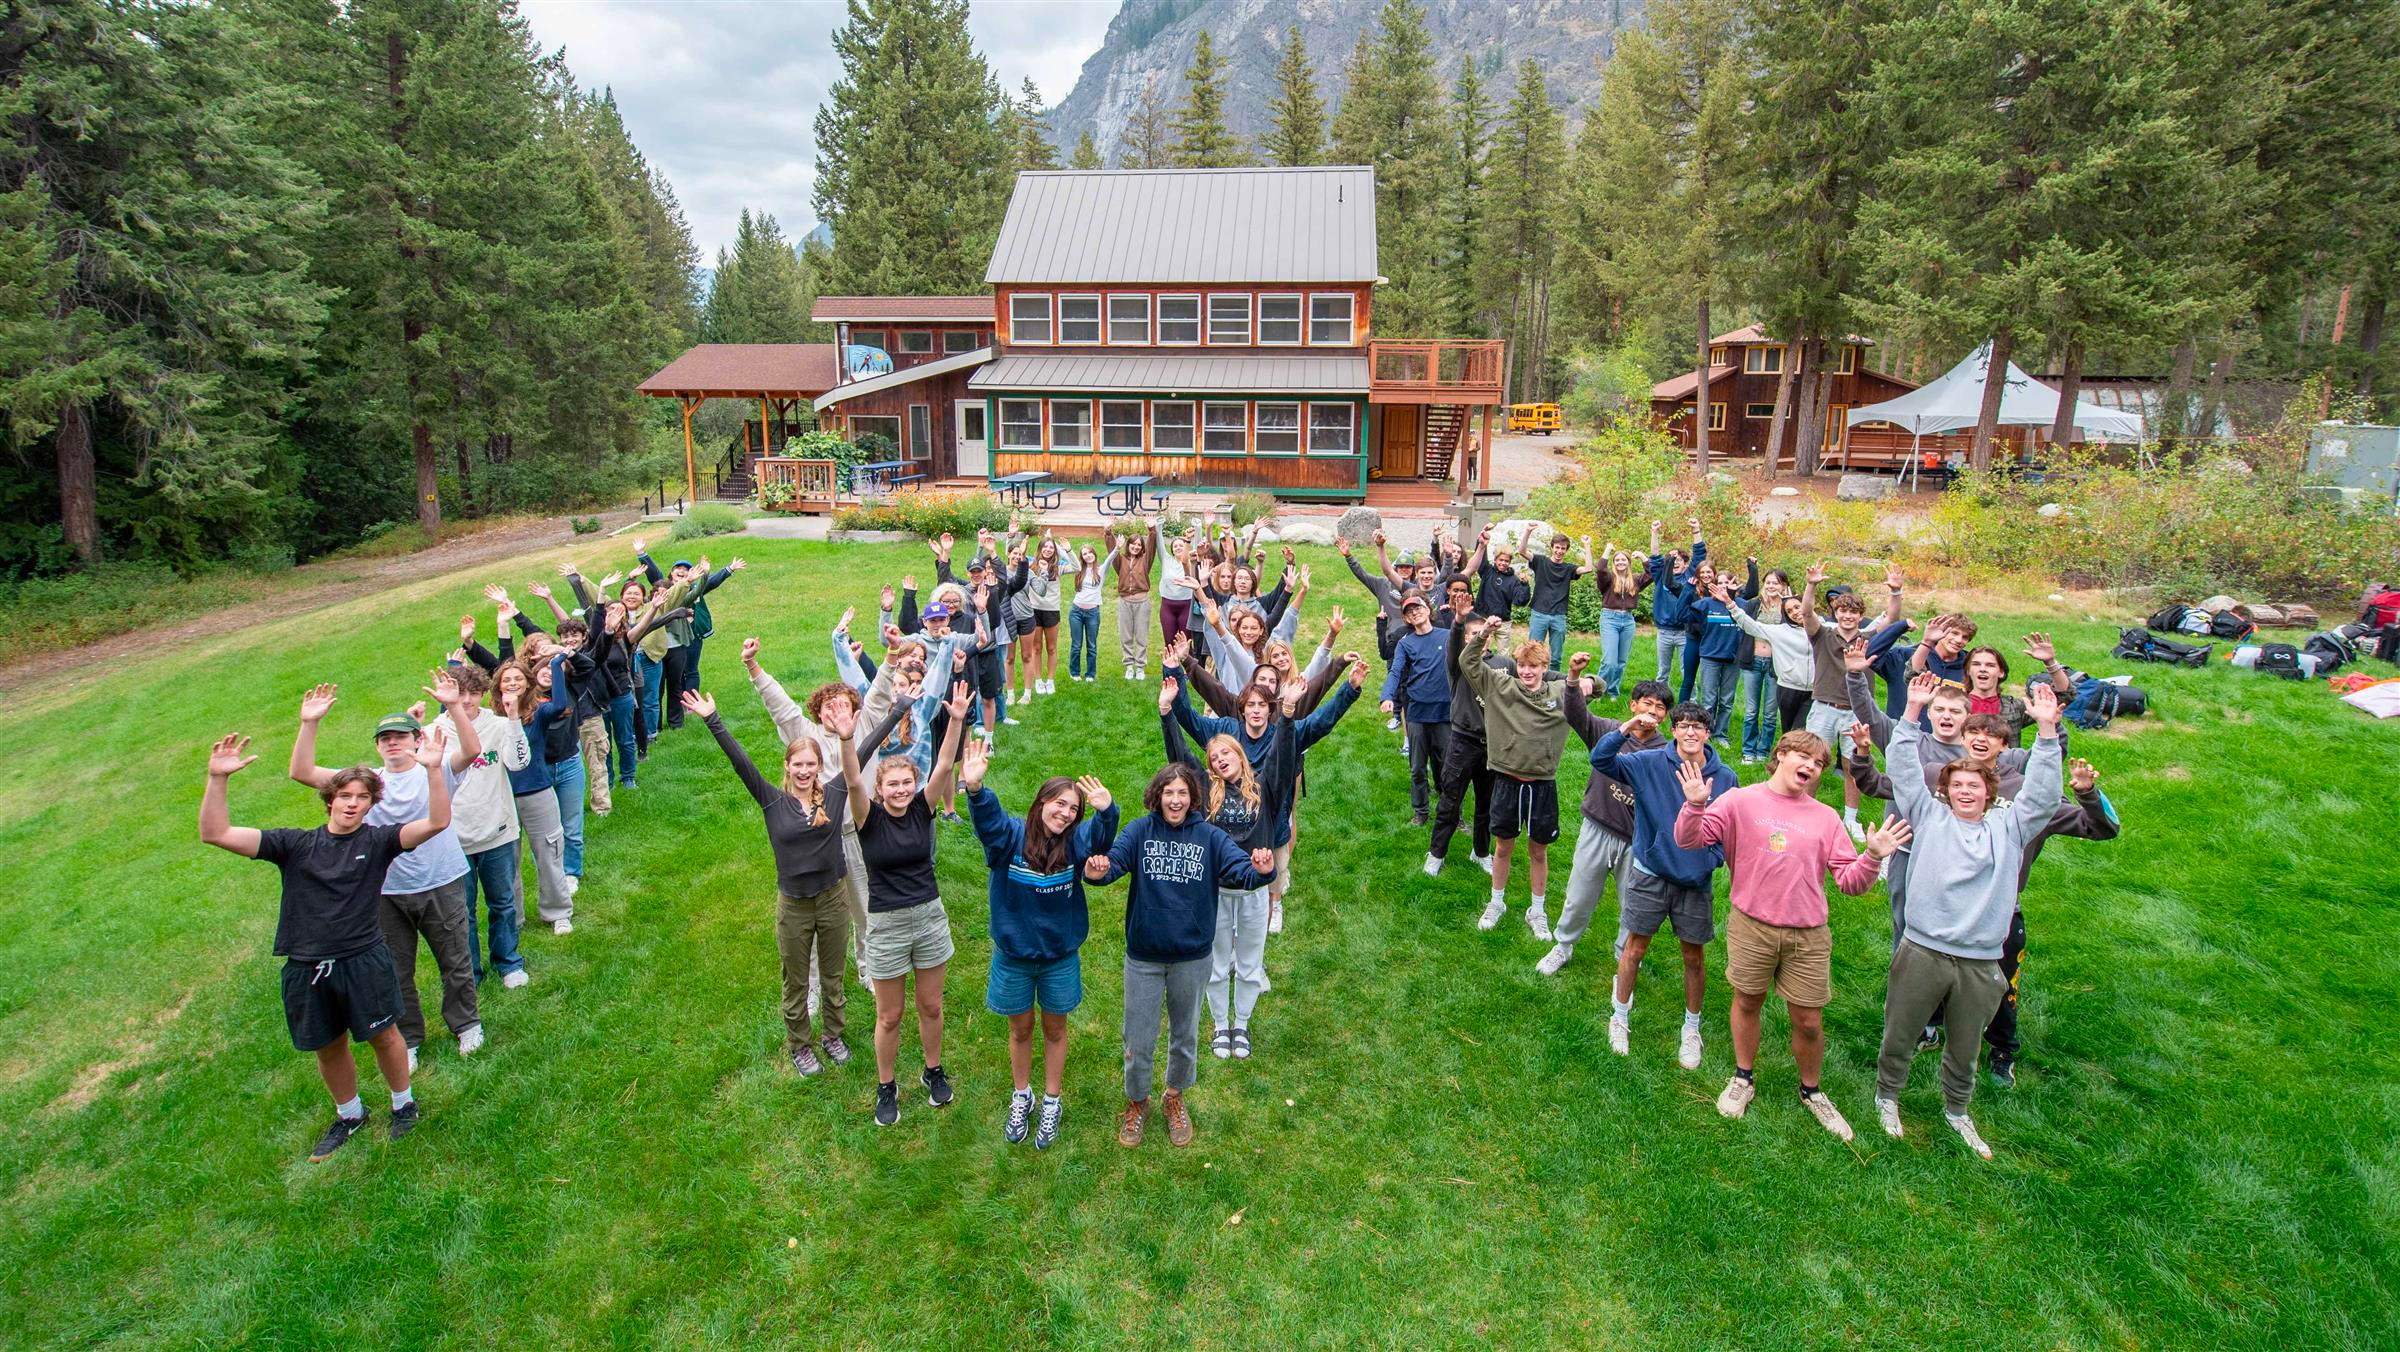 Group of people standing in a formation with their arms up in front of a cabin and trees